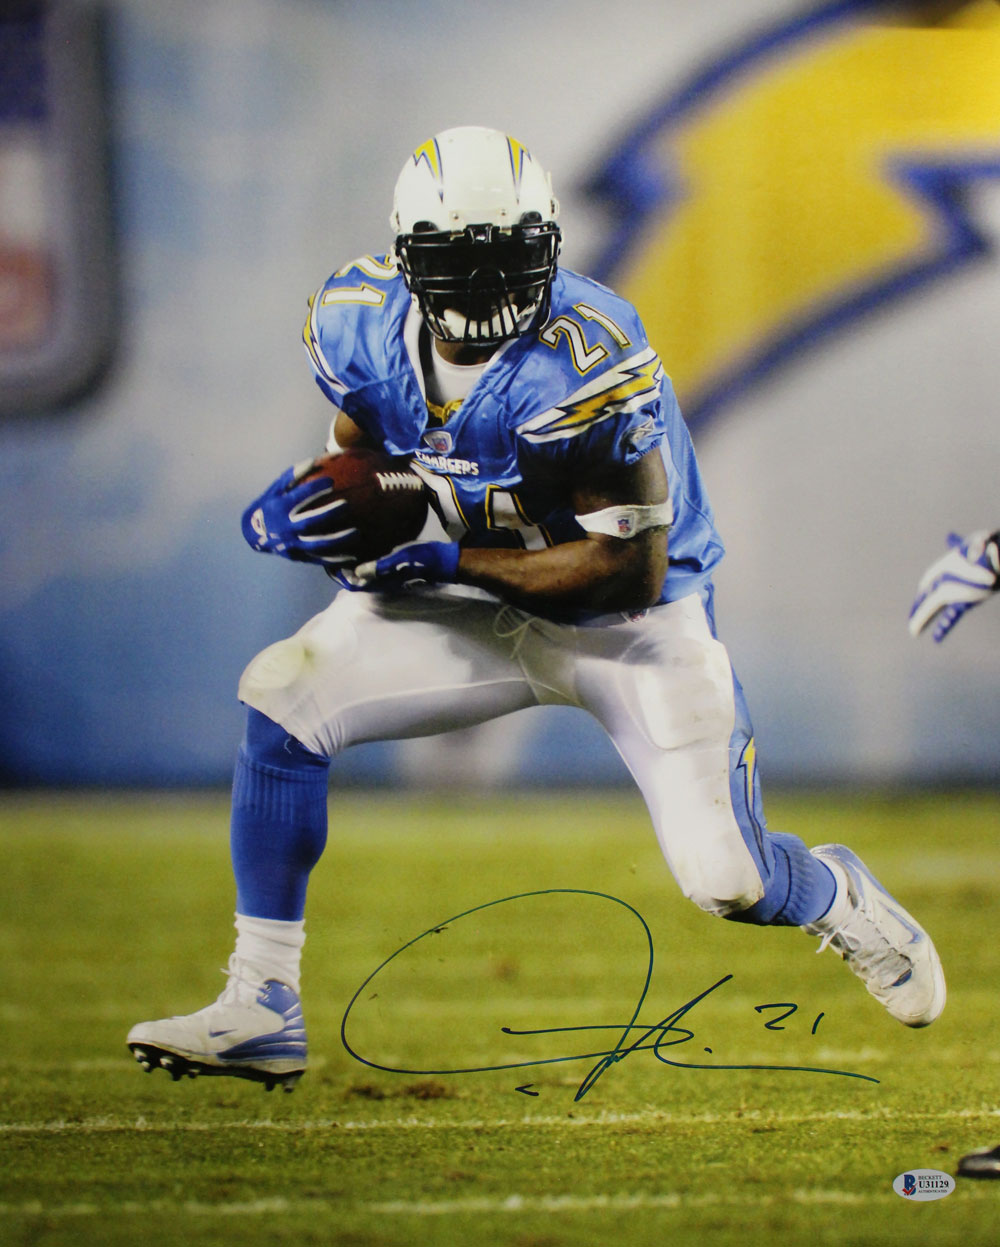 san diego chargers 21 tomlinson